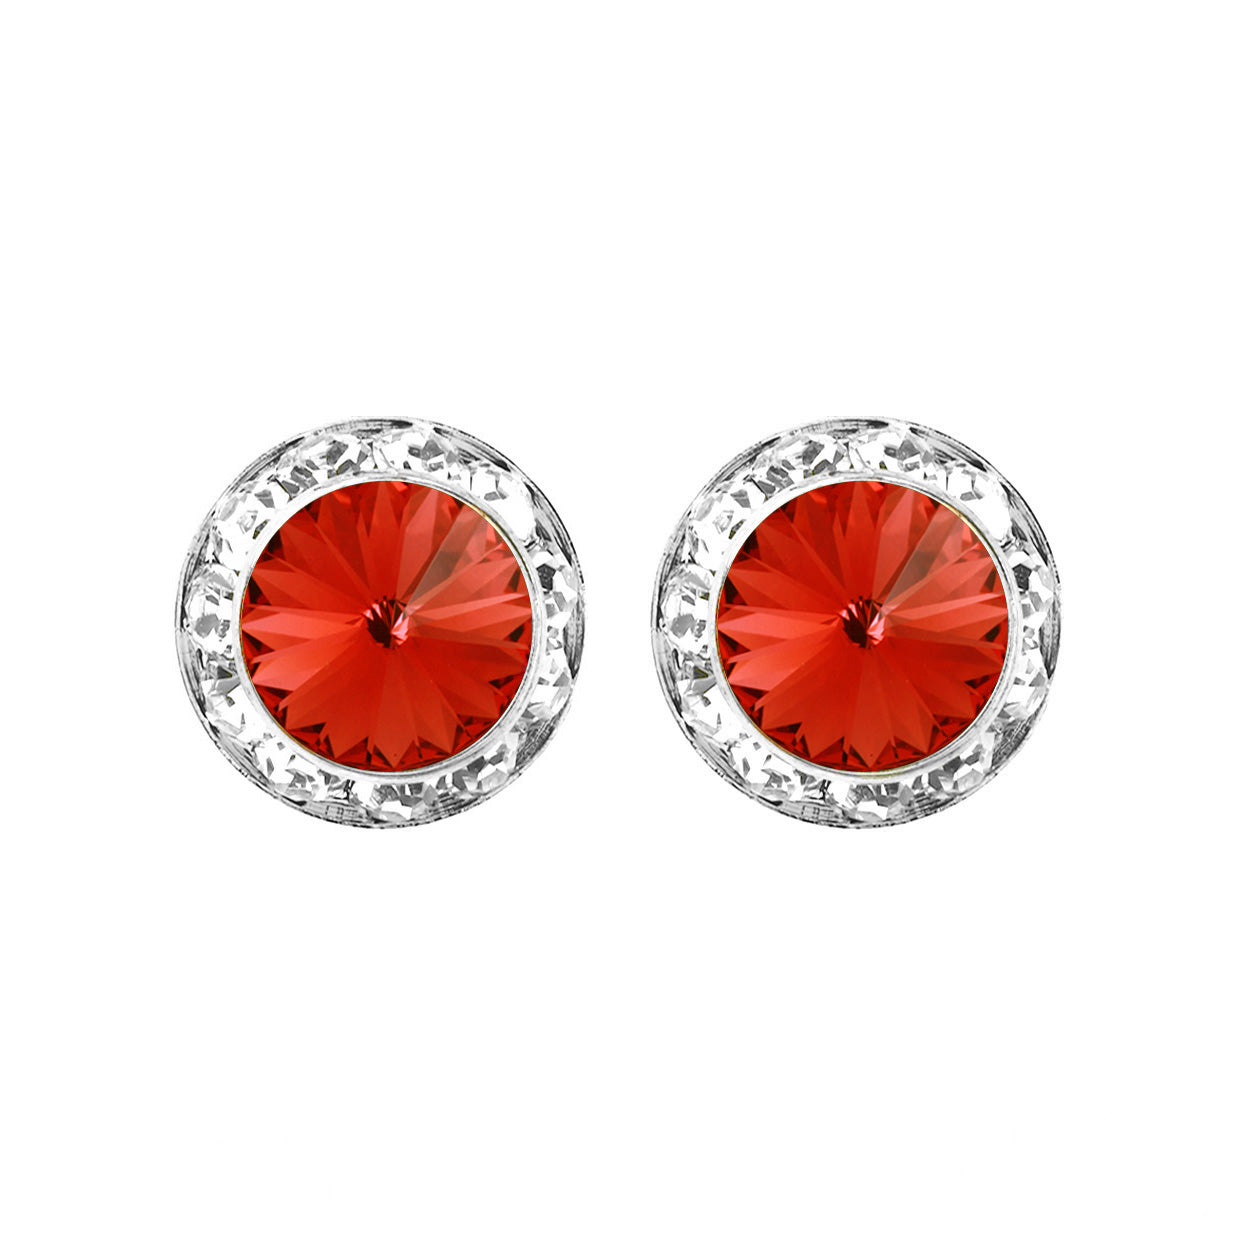 Timeless Classic Hypoallergenic Post Back Halo Earrings Made With Swarovski Crystals (20mm, Padpardscha Orange Silver Tone)